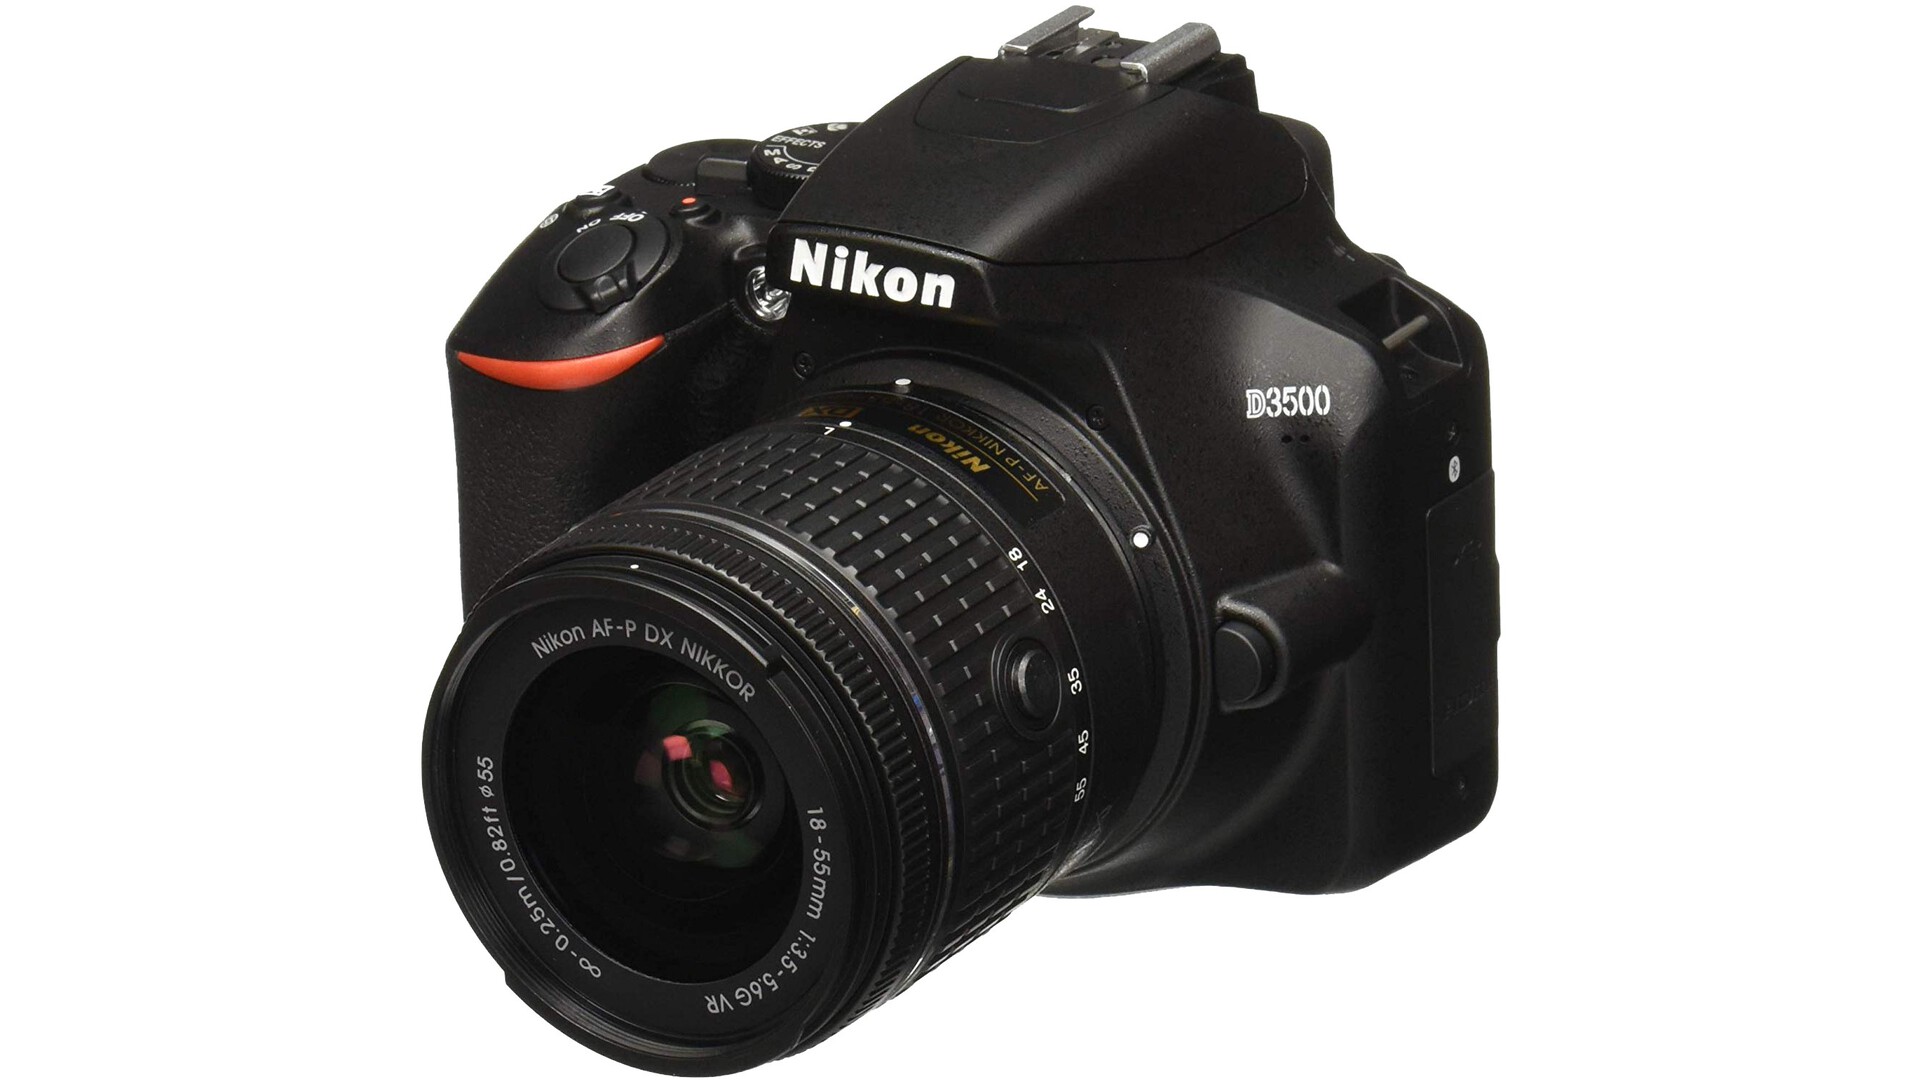 Nikon D3500 with kit lens - Photography Essentials. 